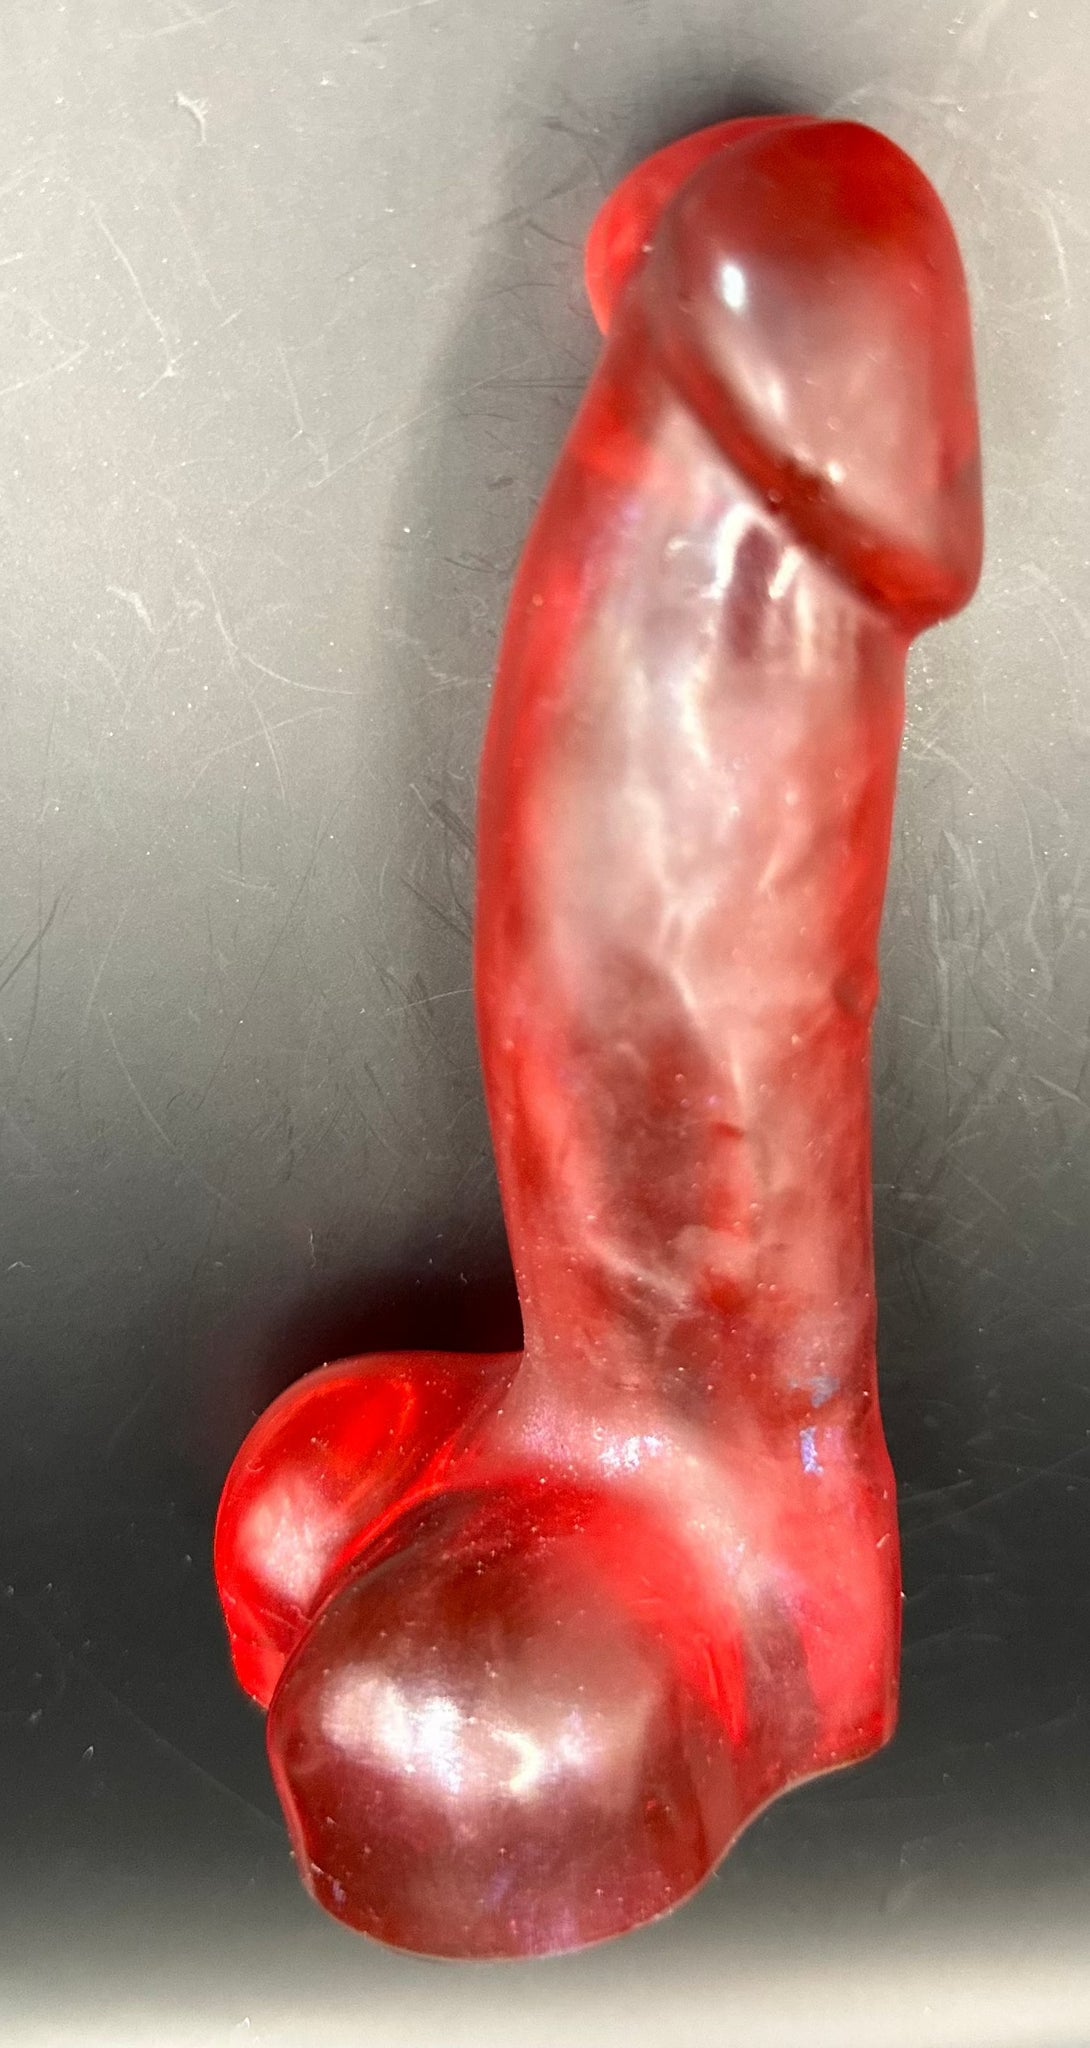 The Red Rooster Resin Penis